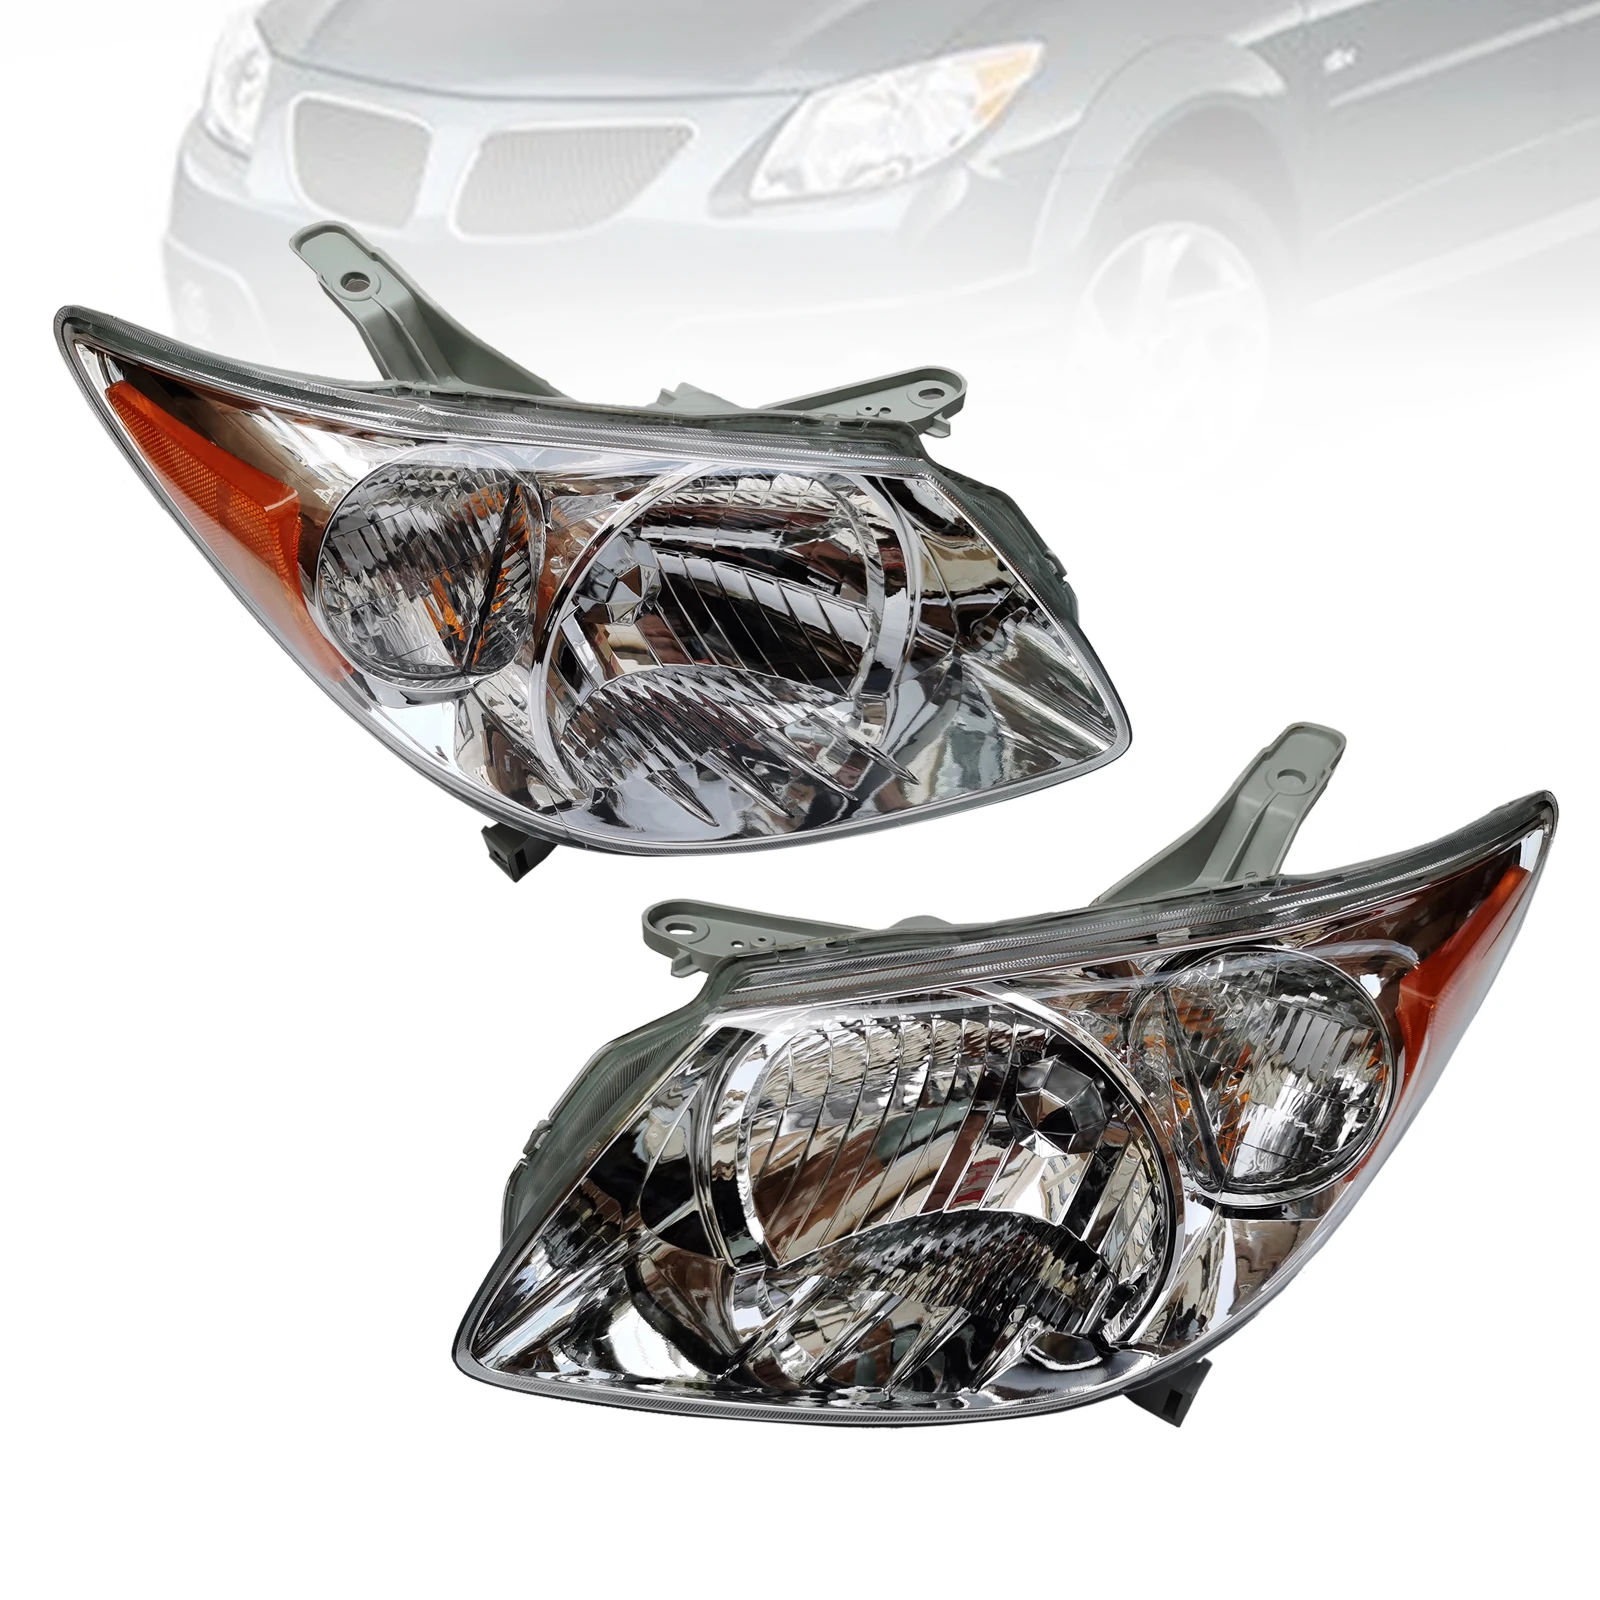 

【1 Pair】 Left and Right Car Headlights for 2005 2006 2007 2008 Pontiac Vibe Wagon with Bulb Halogen Headlamps